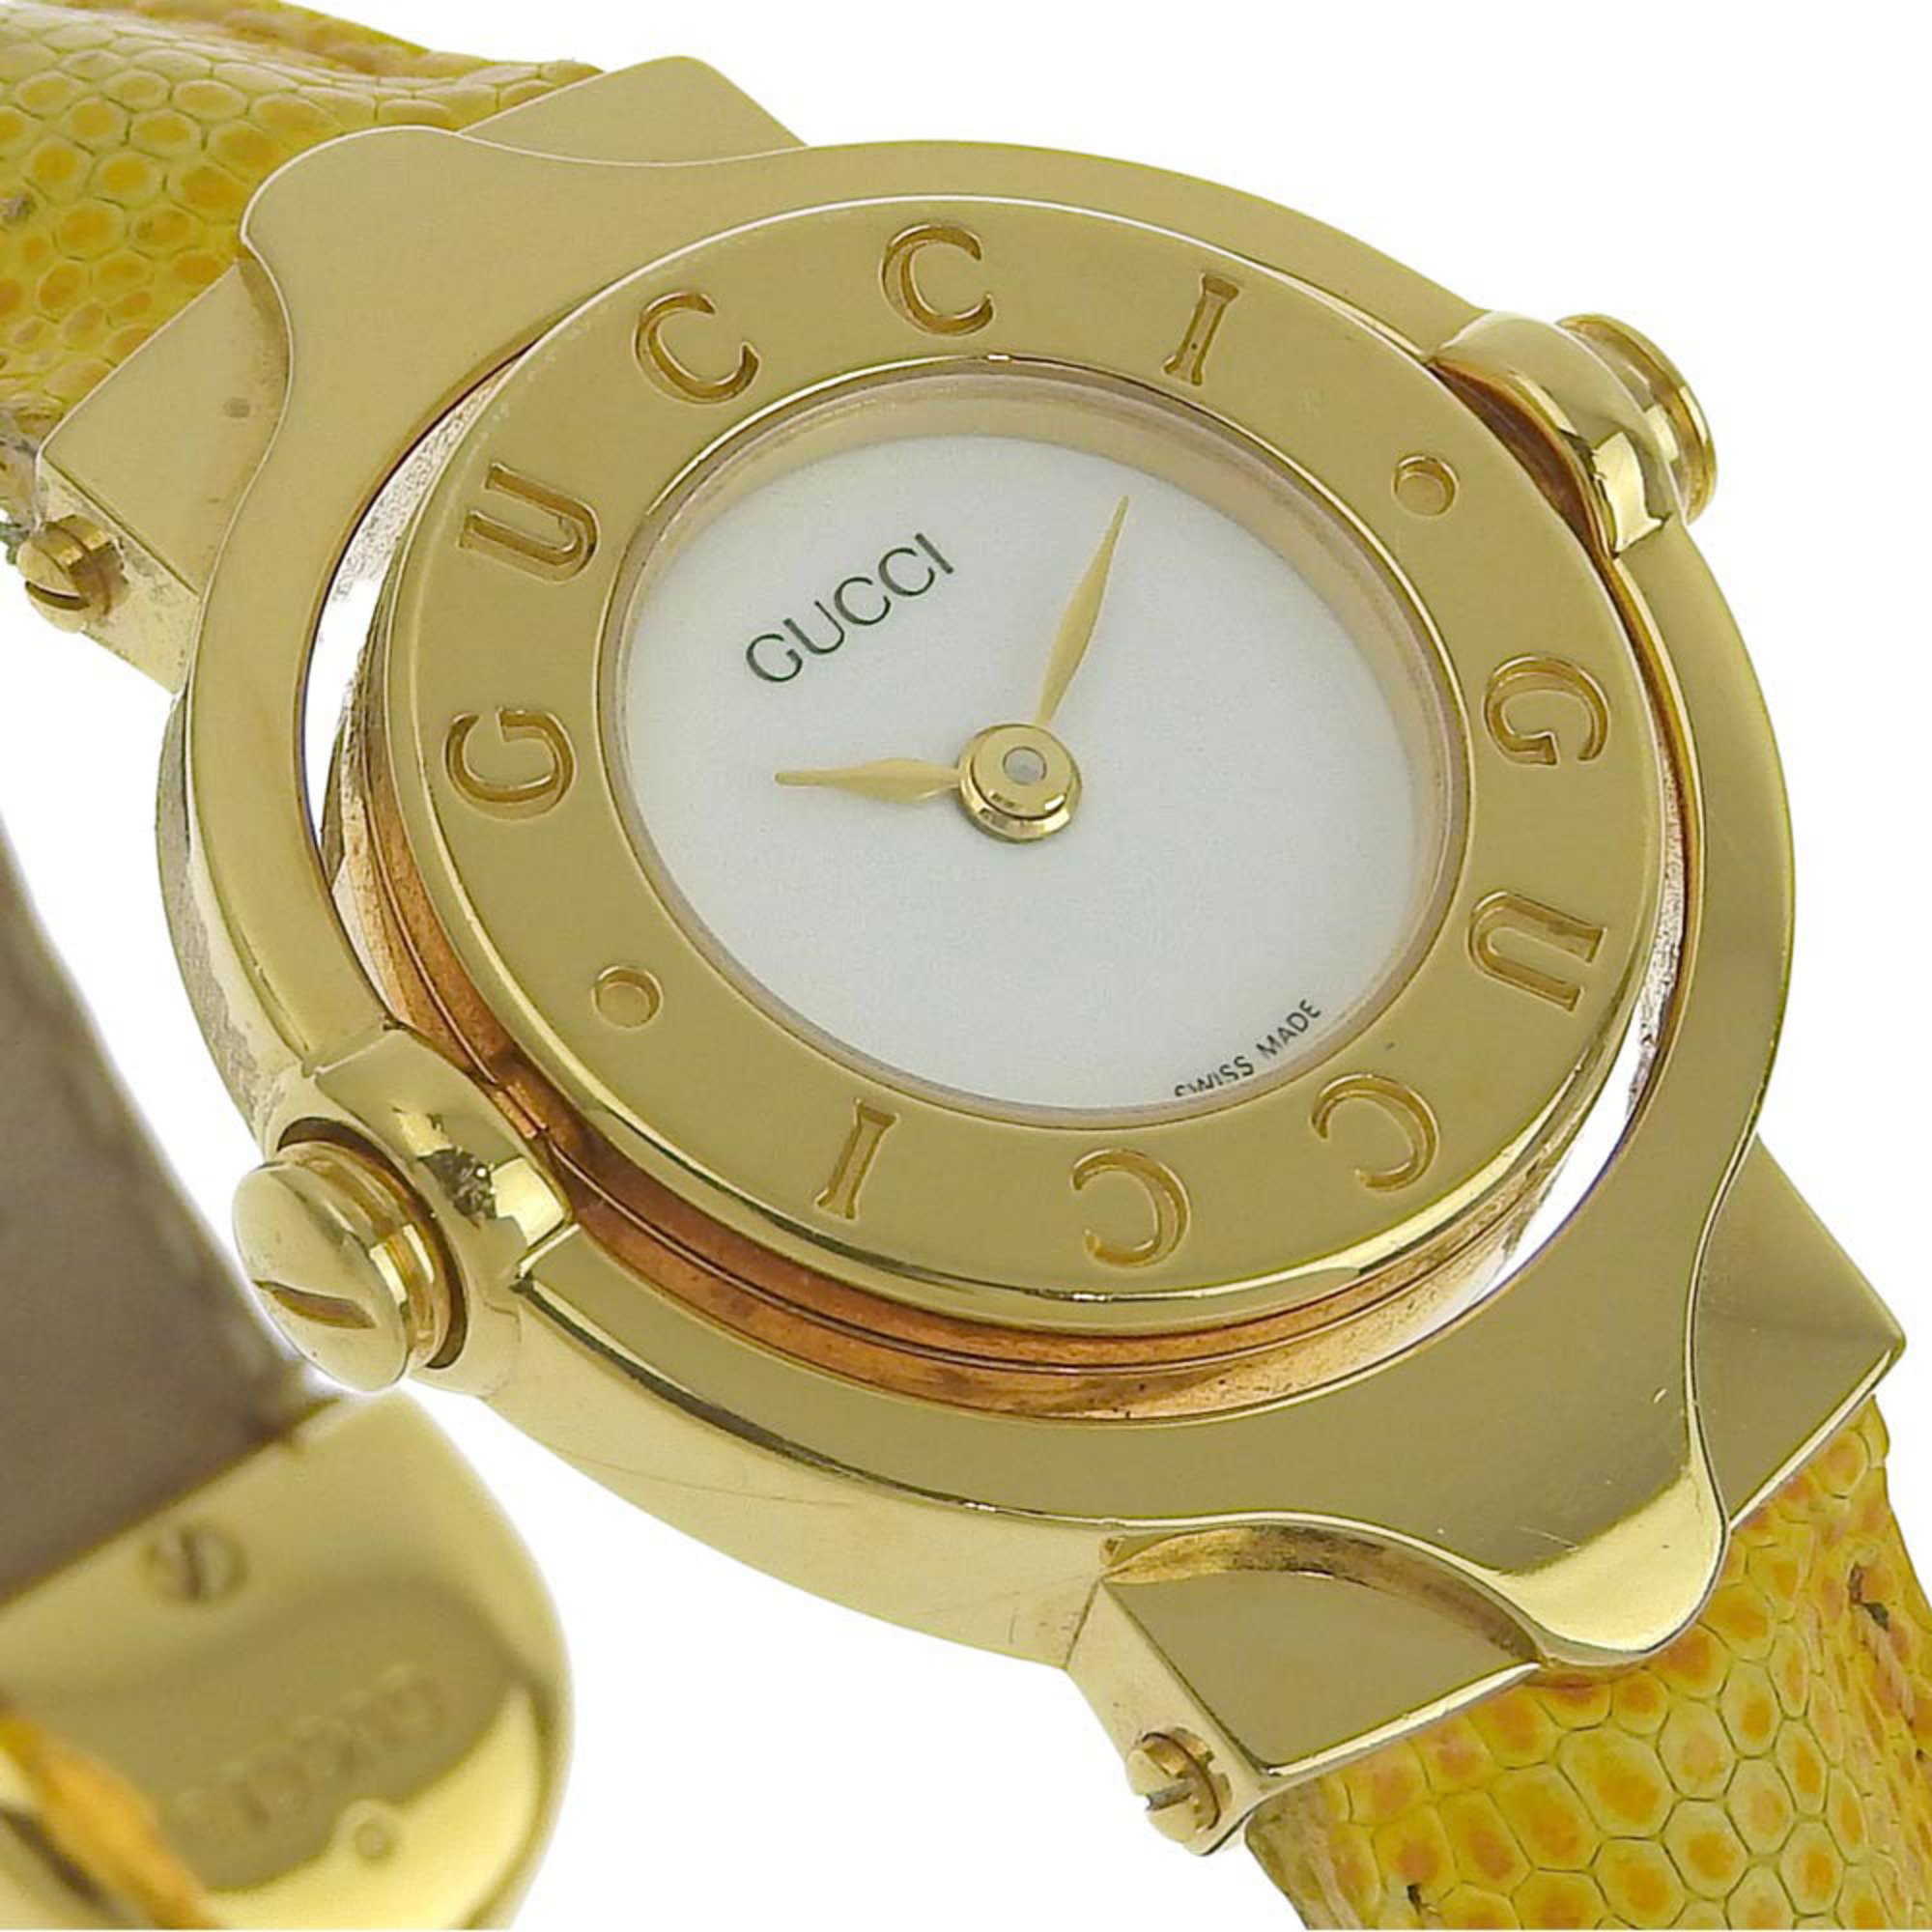 GUCCI Gucci Rotating G Bangle Watch GQ6600 Gold Plated x Leather Yellow Quartz Analog Display Ladies White Dial